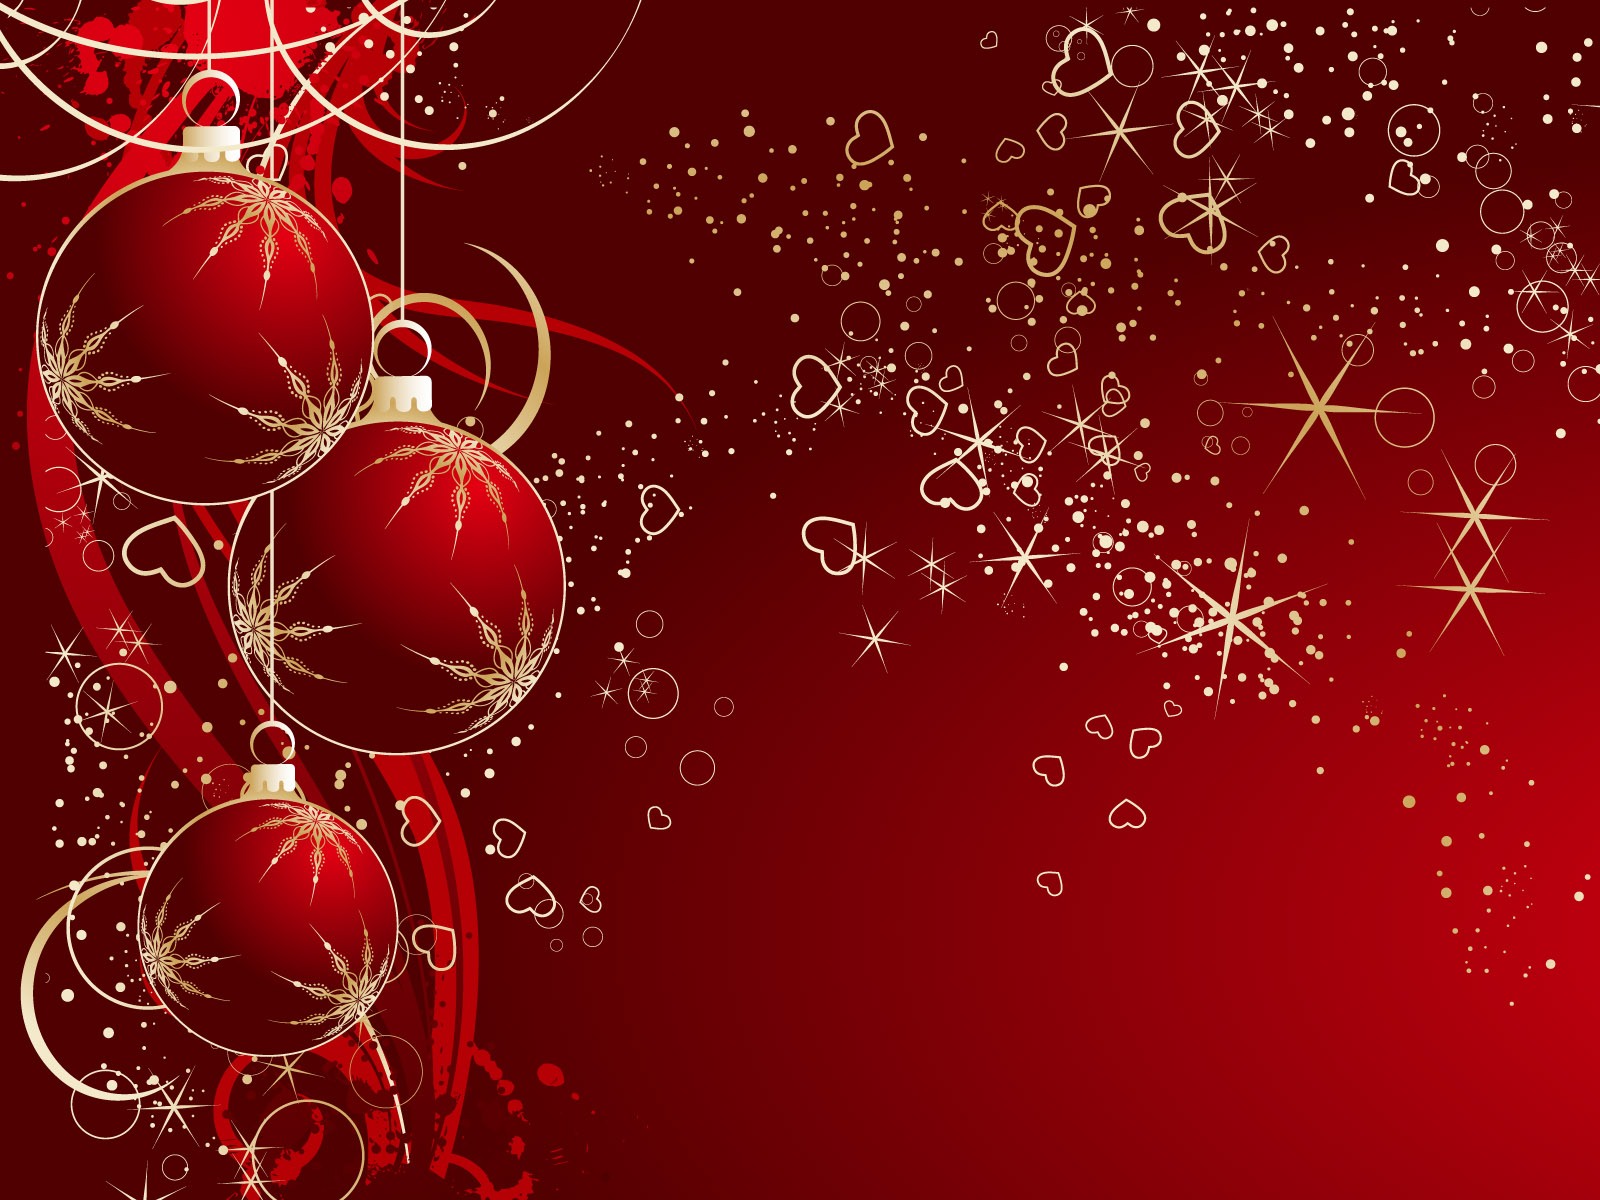 Red Golden Silver Christmas Decoration Balls Stars Red Background 4K 5K HD Christmas  Wallpapers  HD Wallpapers  ID 97186